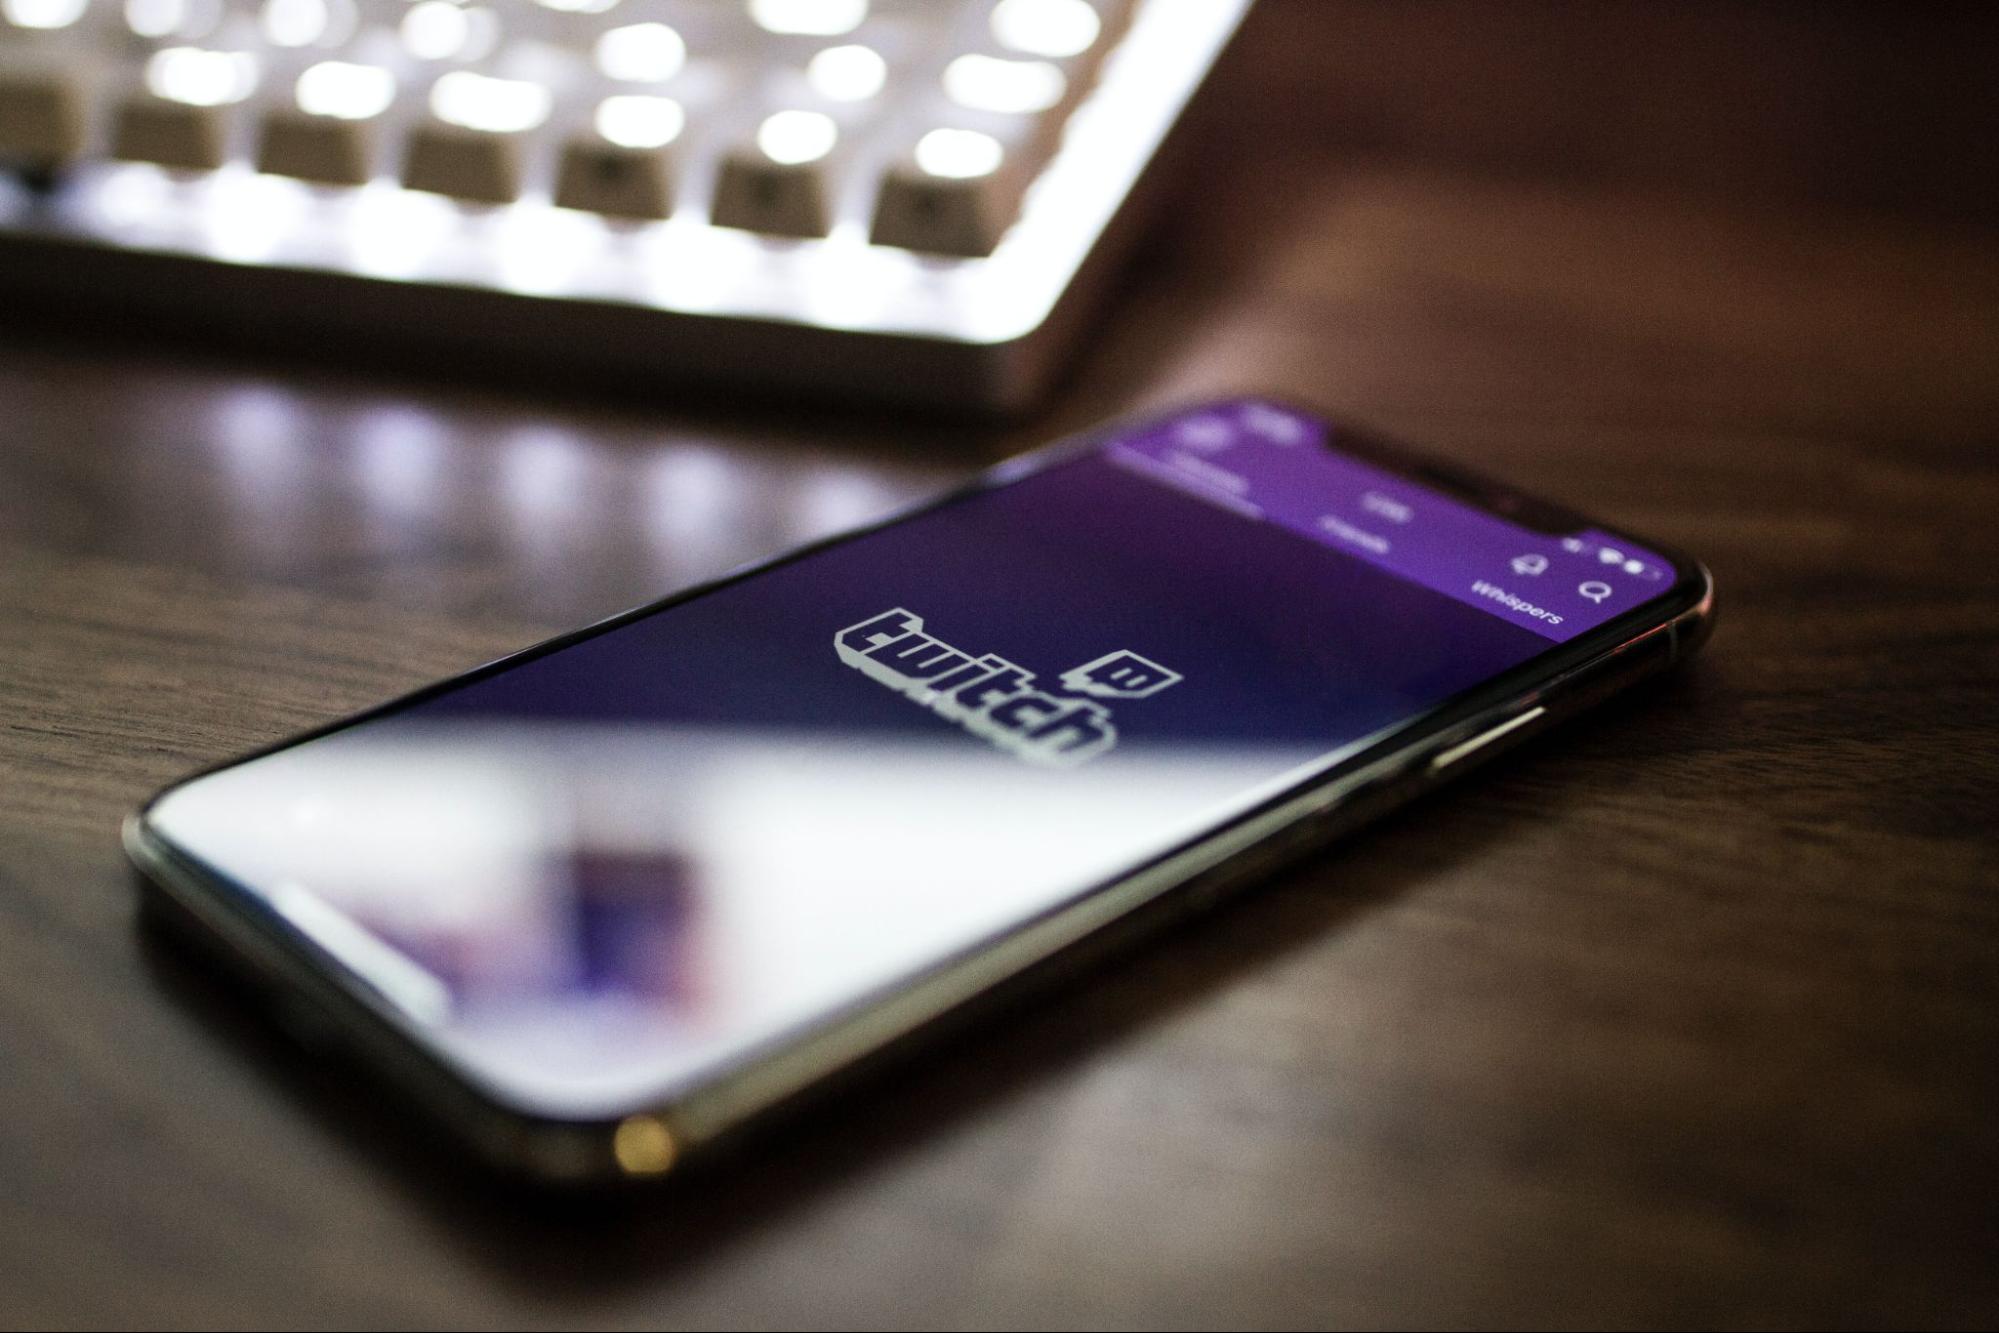 The 5 best Twitch streaming software and apps of 2022